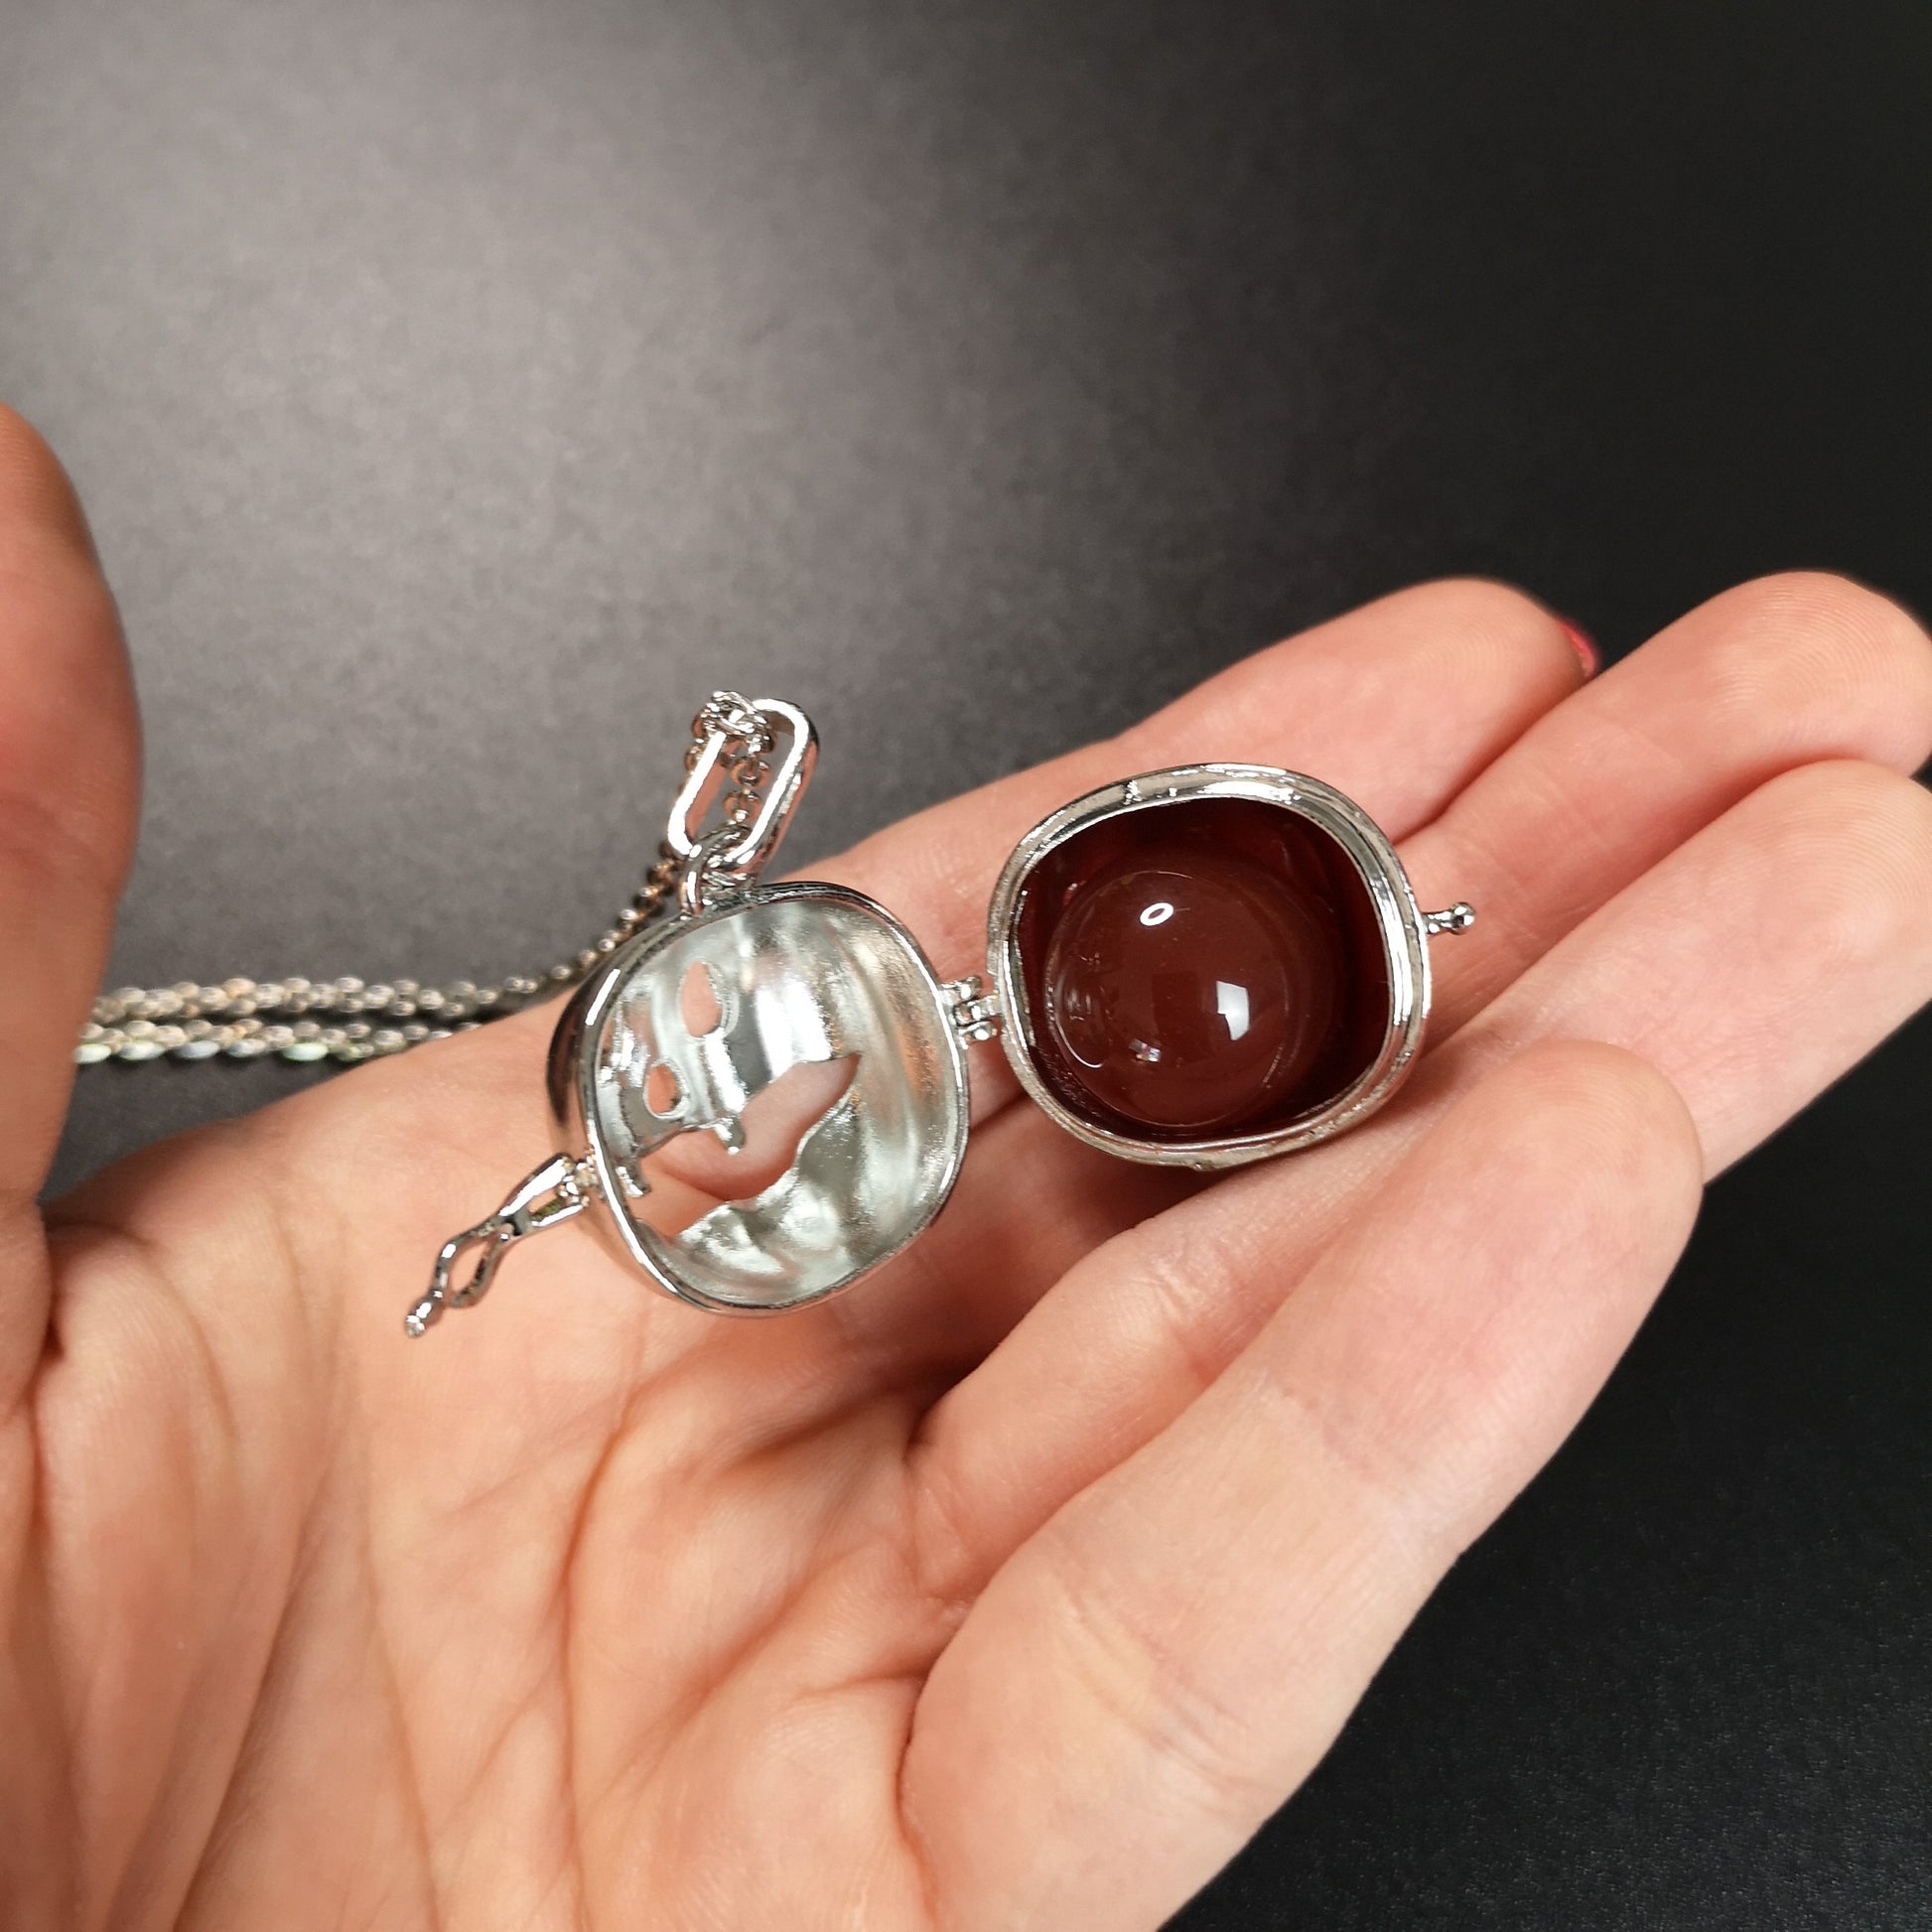 Pumpkin Jack o lantern and carnelian gothic witchy Halloween locket necklace Baguette Magick